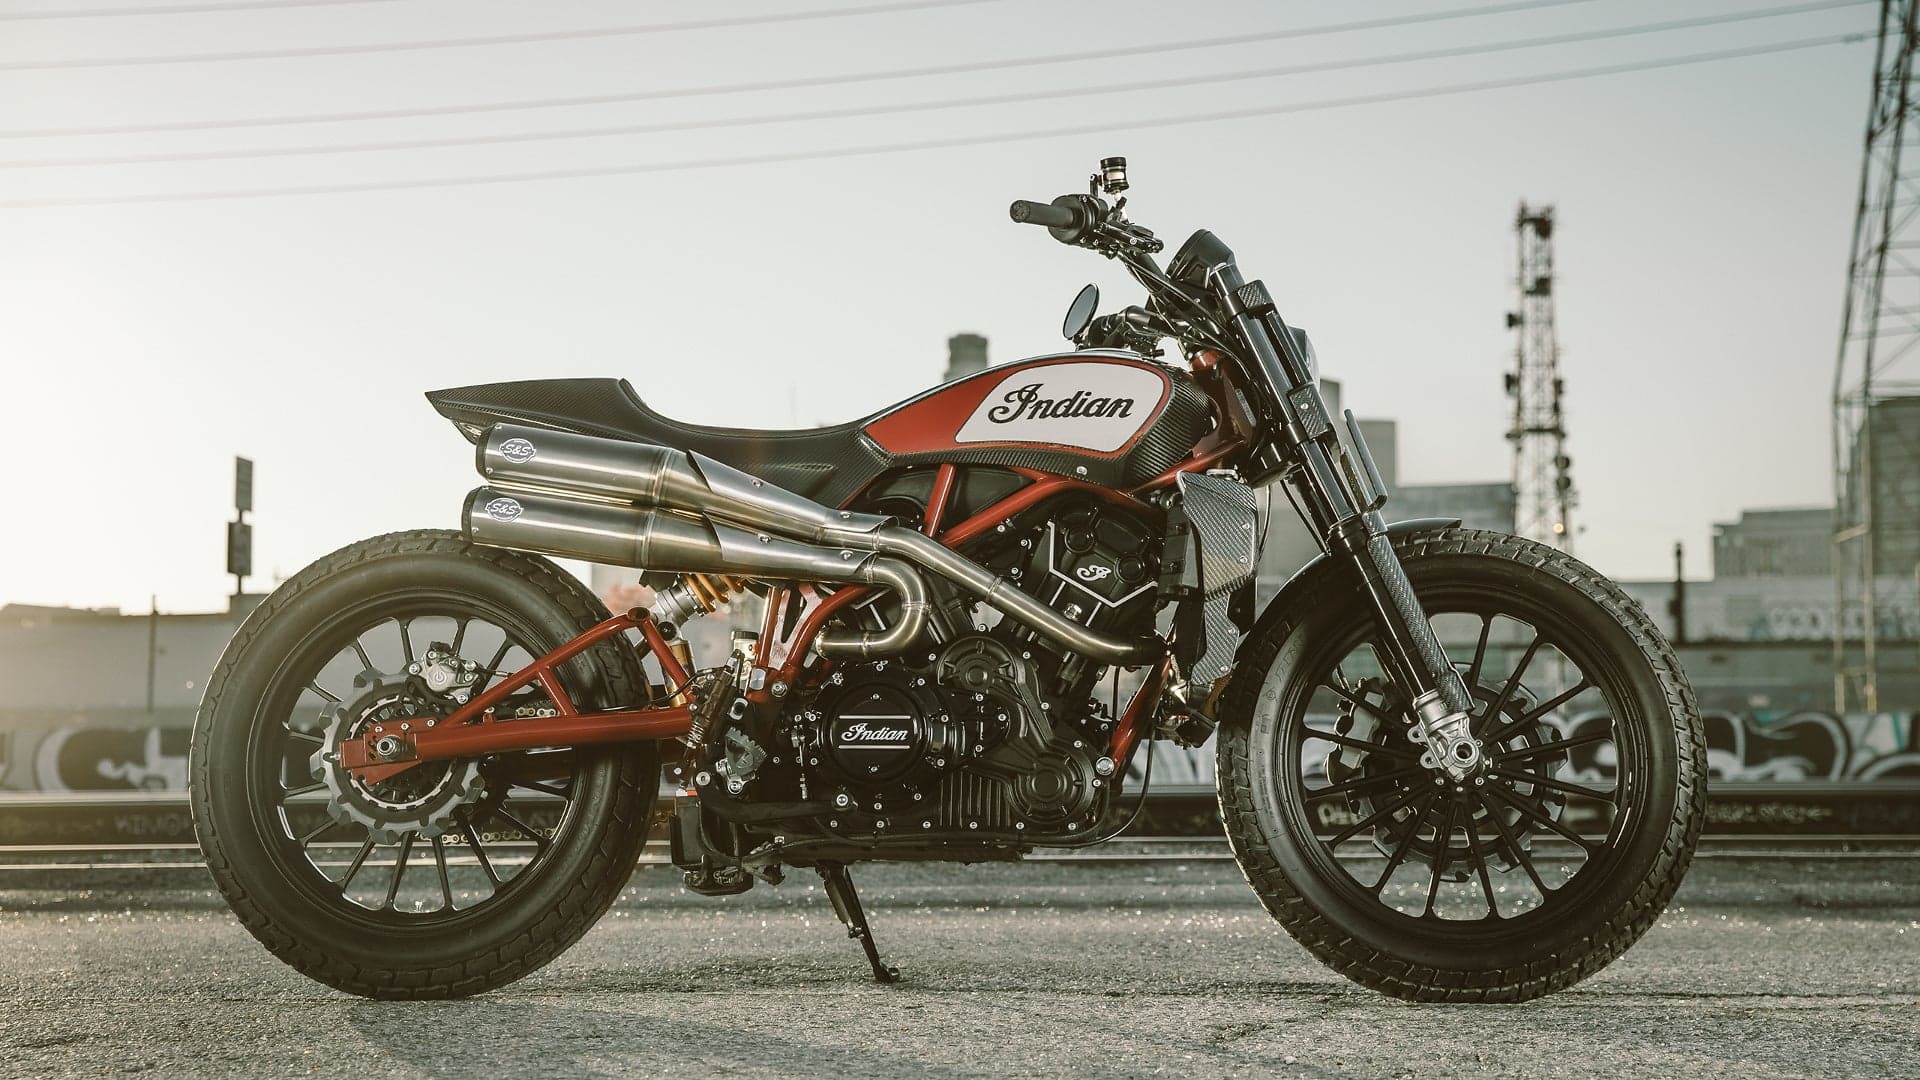 The Indian Scout FTR1200 Custom is the Street-Legal Flat Track Bike of Our Dreams